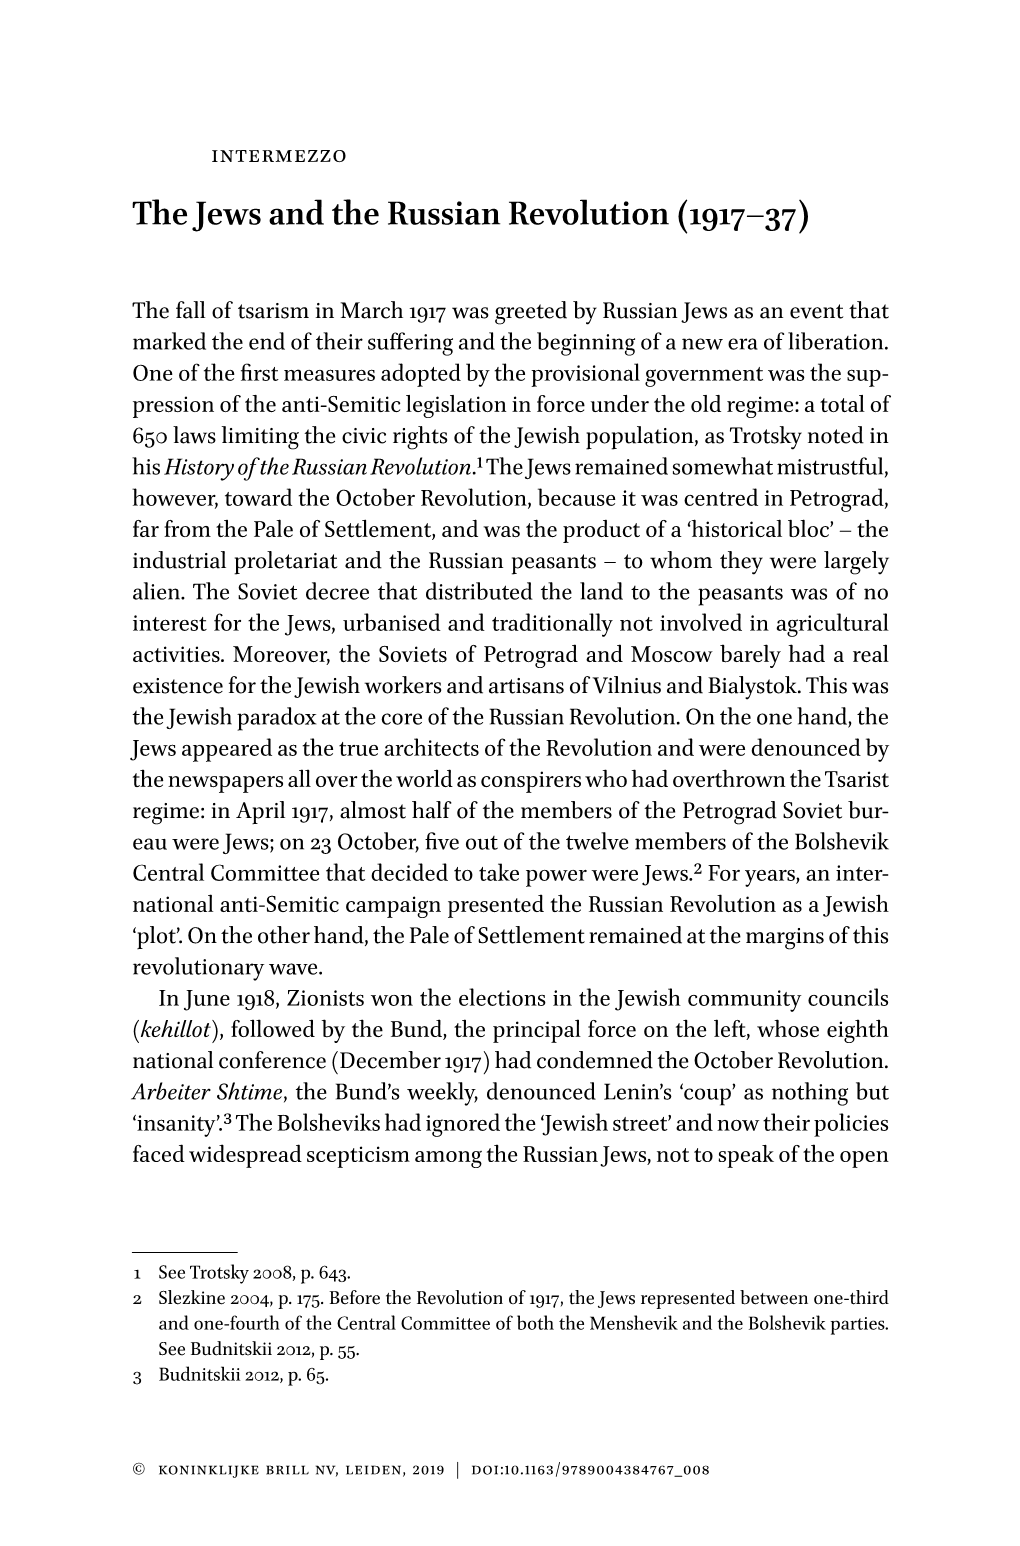 The Jews and the Russian Revolution (1917–37)